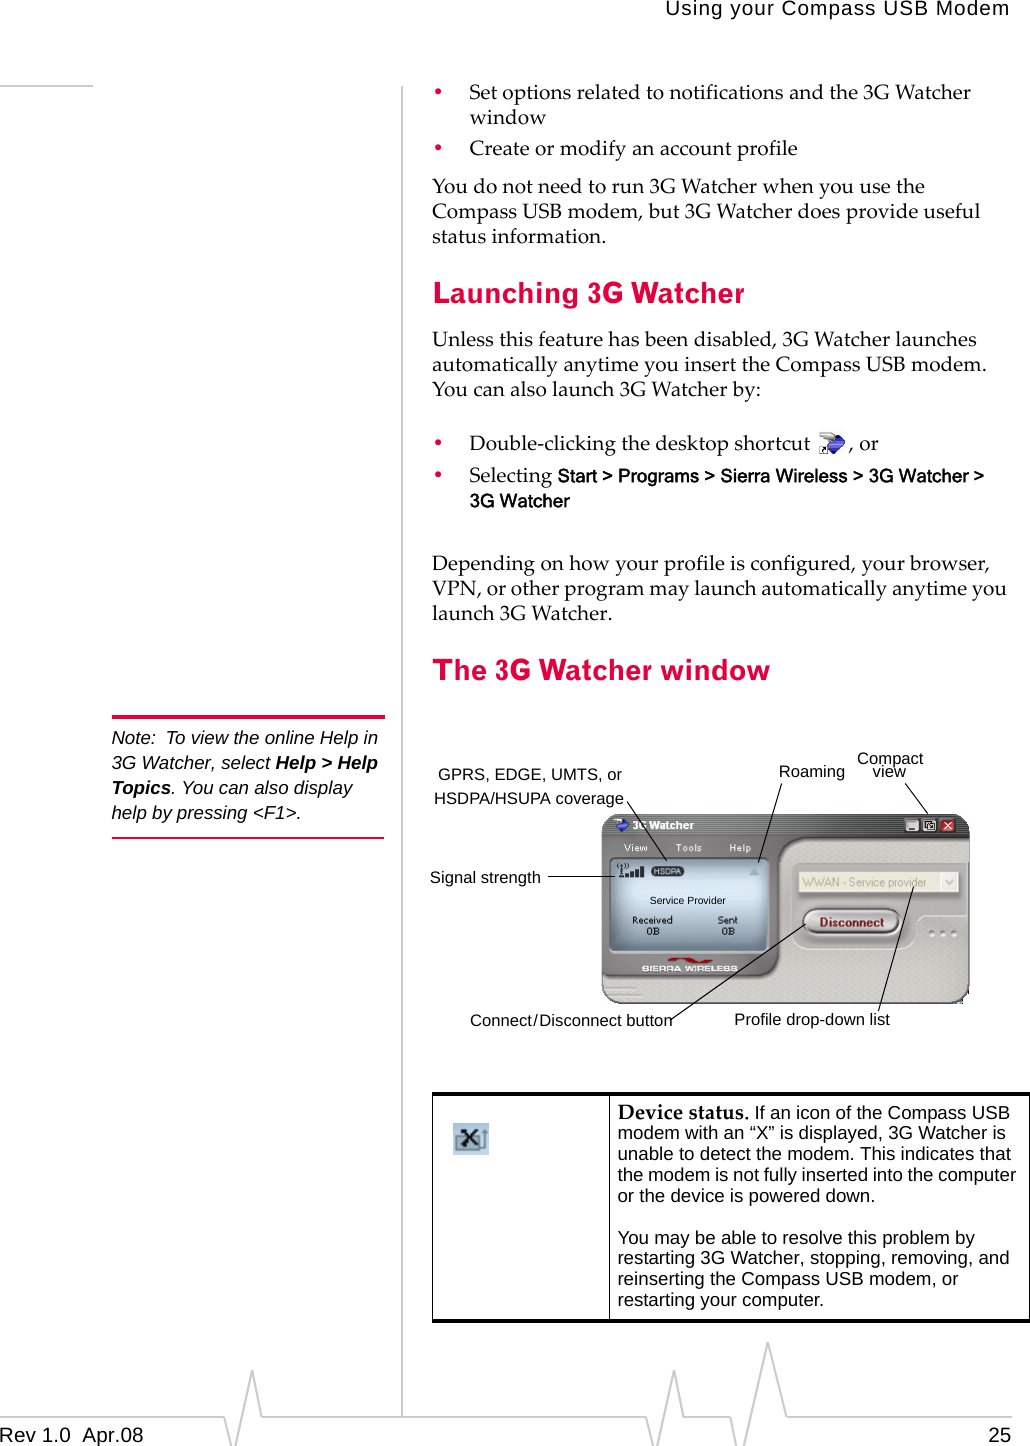 Note:  To view the online Help in 3G Watcher, select Help &gt; Help Topics. You can also display help by pressing &lt;F1&gt;. Using your Compass USB Modem •  Set options related to notifications and the 3G Watcher window •  Create or modify an account profile You do not need to run 3G Watcher when you use the Compass USB modem, but 3G Watcher does provide useful status information. Launching 3G Watcher Unless this feature has been disabled, 3G Watcher launches automatically anytime you insert the Compass USB modem. You can also launch 3G Watcher by: •  Double-clicking the desktop shortcut  , or •  Selecting Start &gt; Programs &gt; Sierra Wireless &gt; 3G Watcher &gt; 3G Watcher Depending on how your profile is configured, your browser, VPN, or other program may launch automatically anytime you launch 3G Watcher. The 3G Watcher window Compact GPRS, EDGE, UMTS, or Service Provider Roaming  view HSDPA/HSUPA coverage Signal strength Connect/Disconnect button  Profile drop-down list Device status. If an icon of the Compass USB modem with an “X” is displayed, 3G Watcher is unable to detect the modem. This indicates that the modem is not fully inserted into the computer or the device is powered down. You may be able to resolve this problem by restarting 3G Watcher, stopping, removing, and reinserting the Compass USB modem, or restarting your computer. Rev 1.0  Apr.08  25 